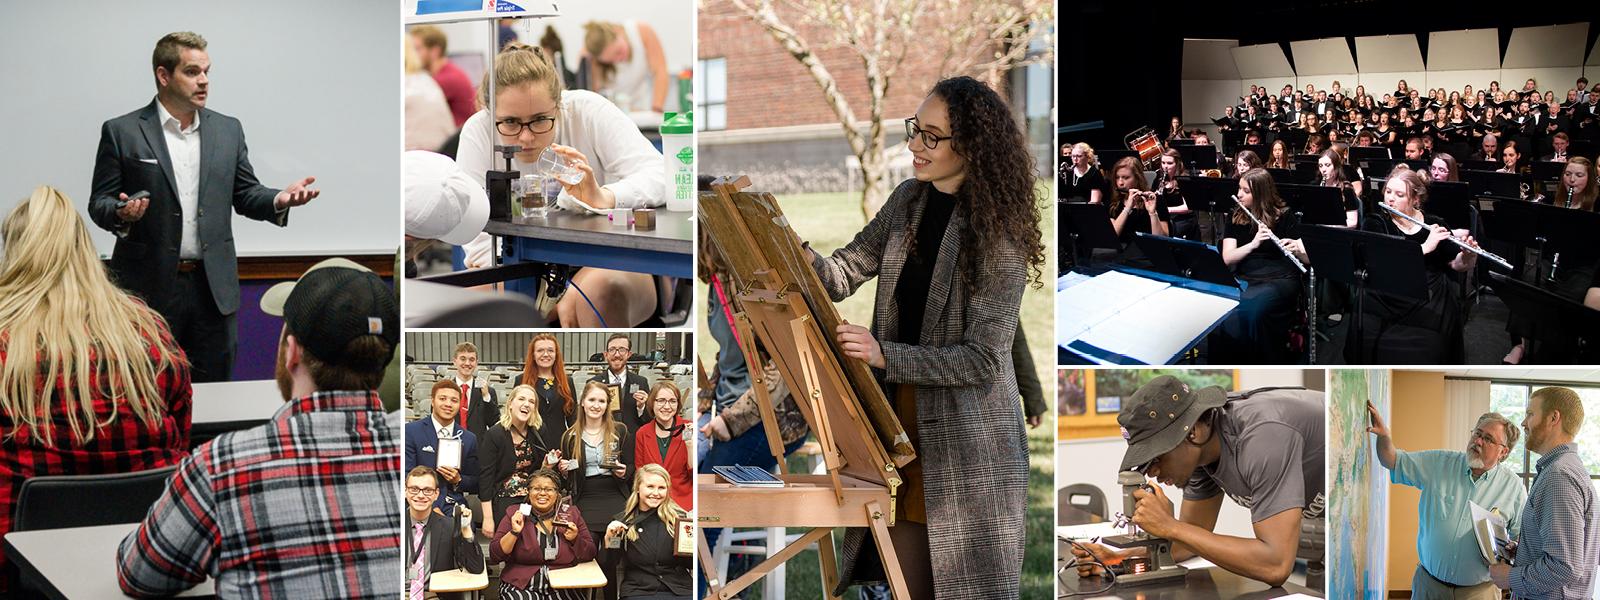 collage of photos showing students at work in areas of art, communication, sciences, etc.